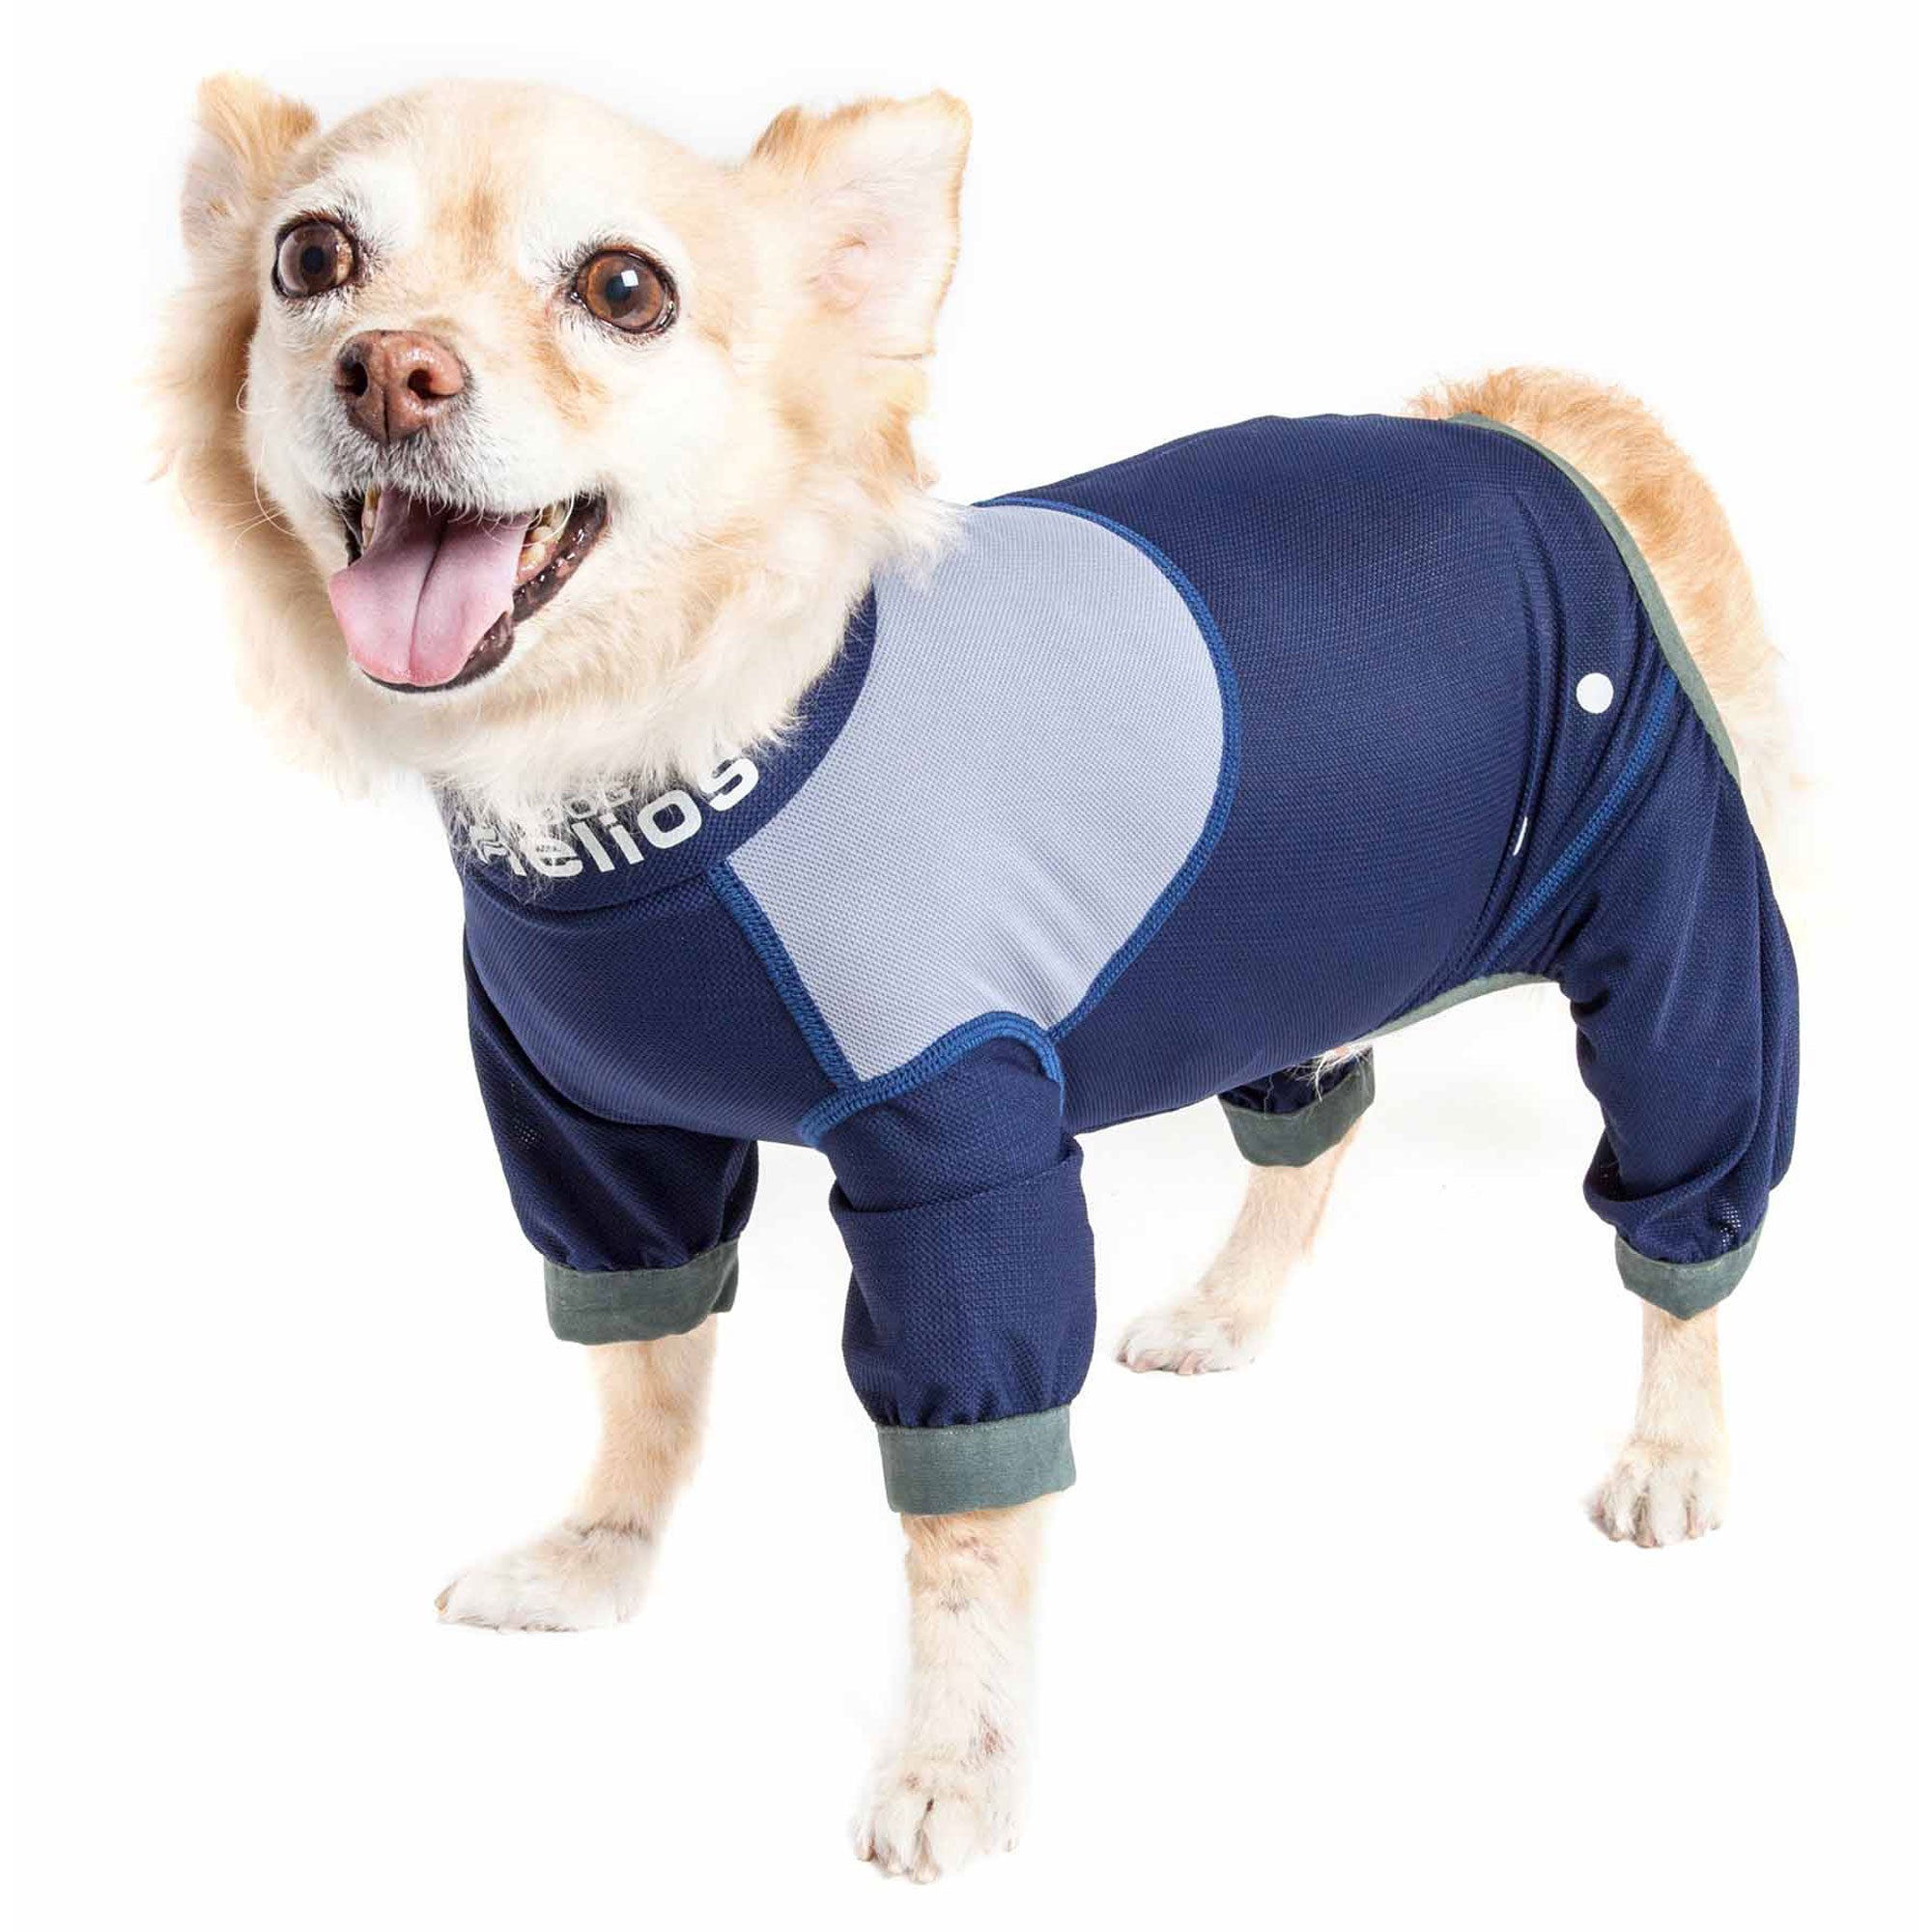 Dog Helios® Tail Runner Dog Track Suit - Blue & Gray - Large